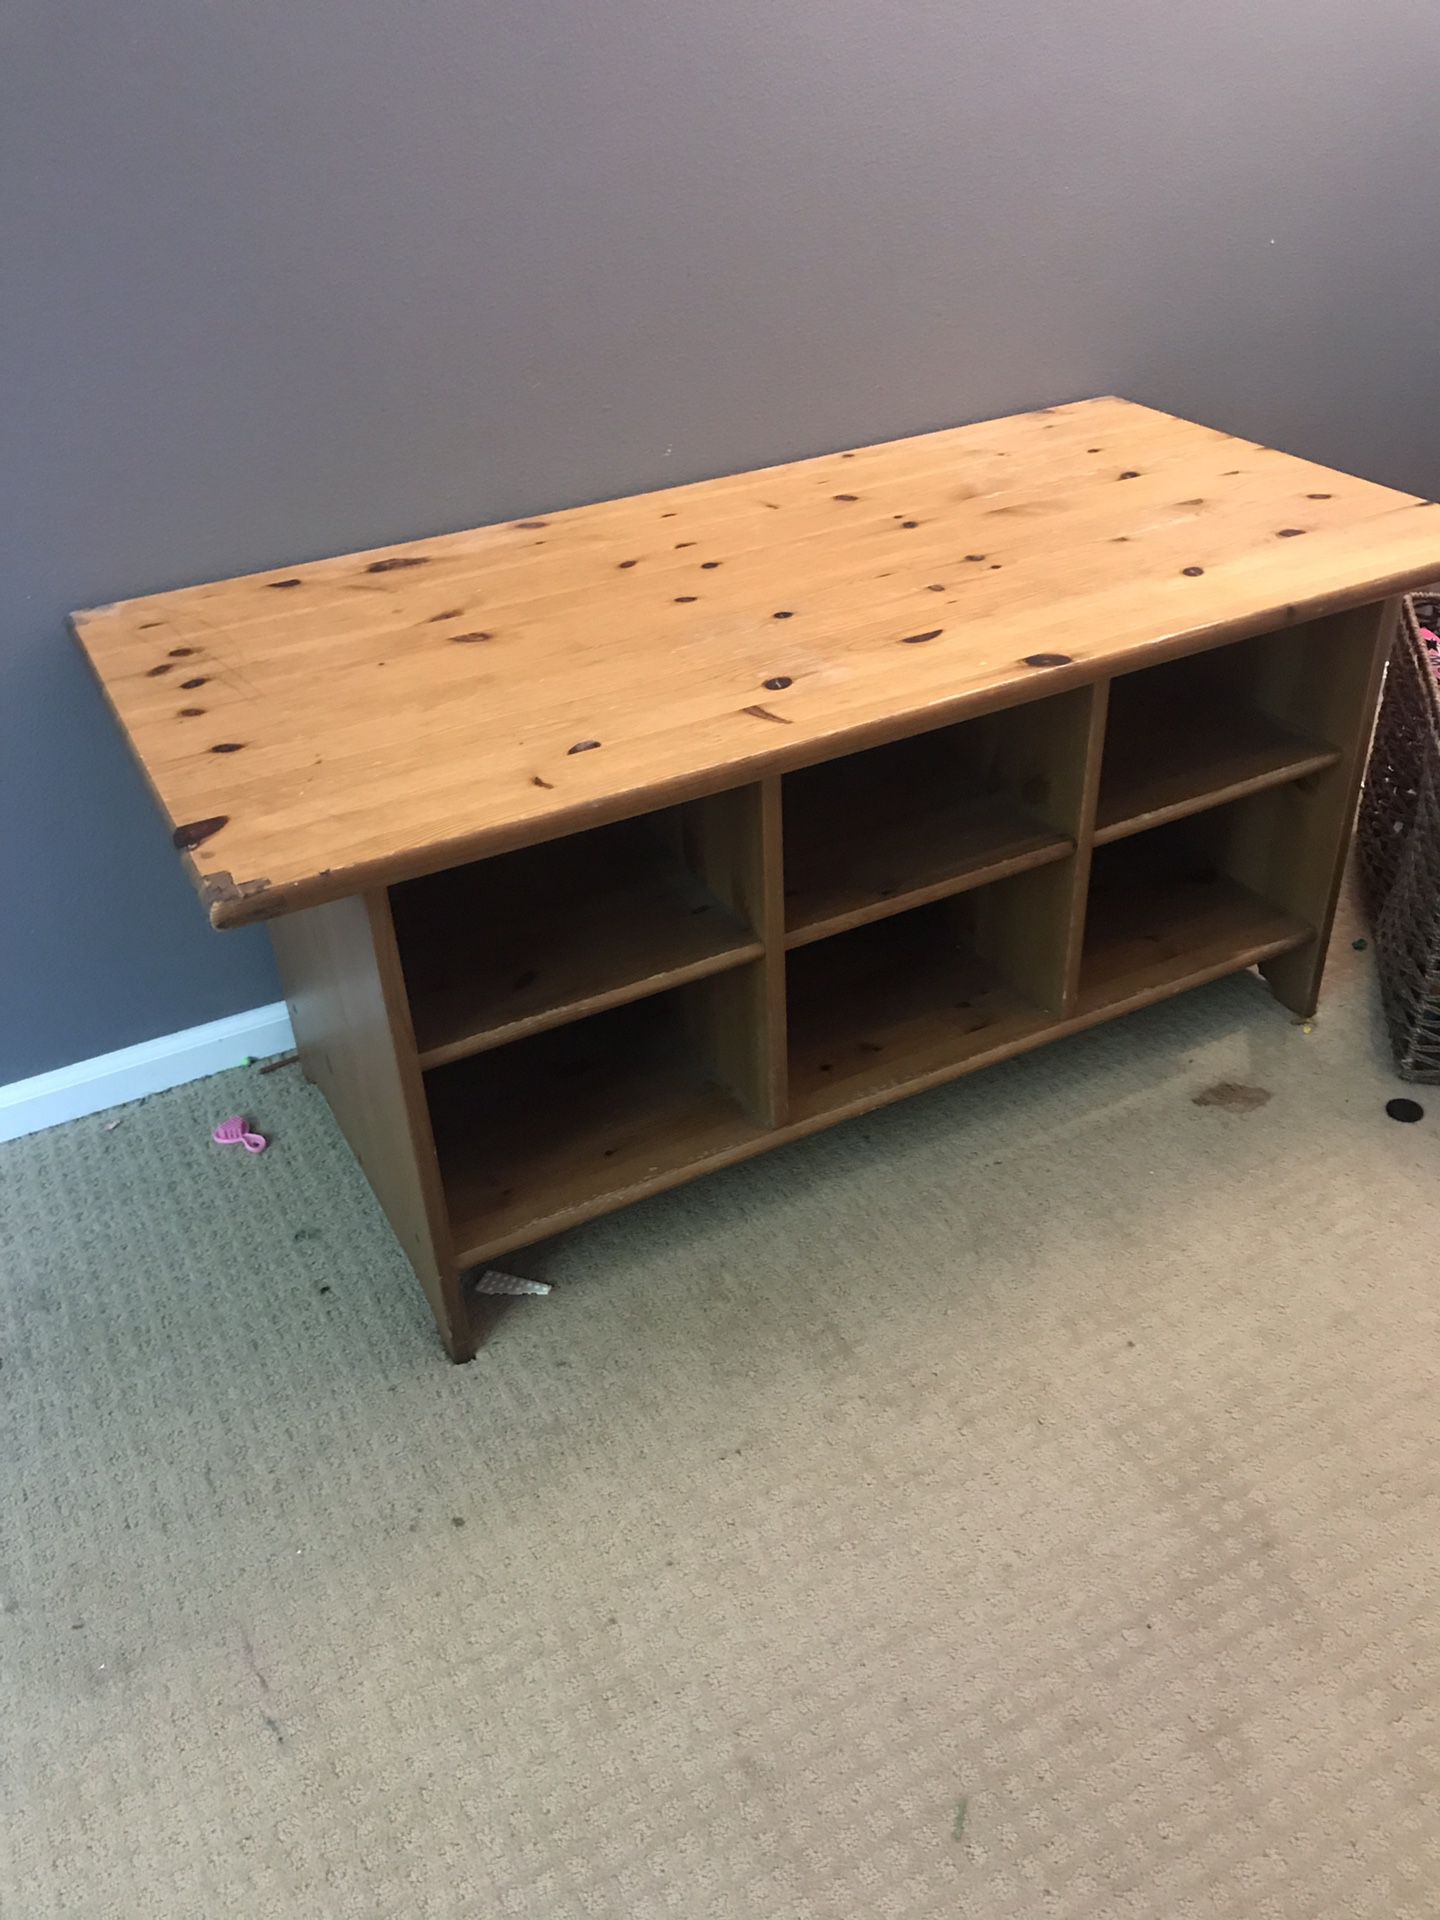 Free coffee table-great for playroom toys and bins